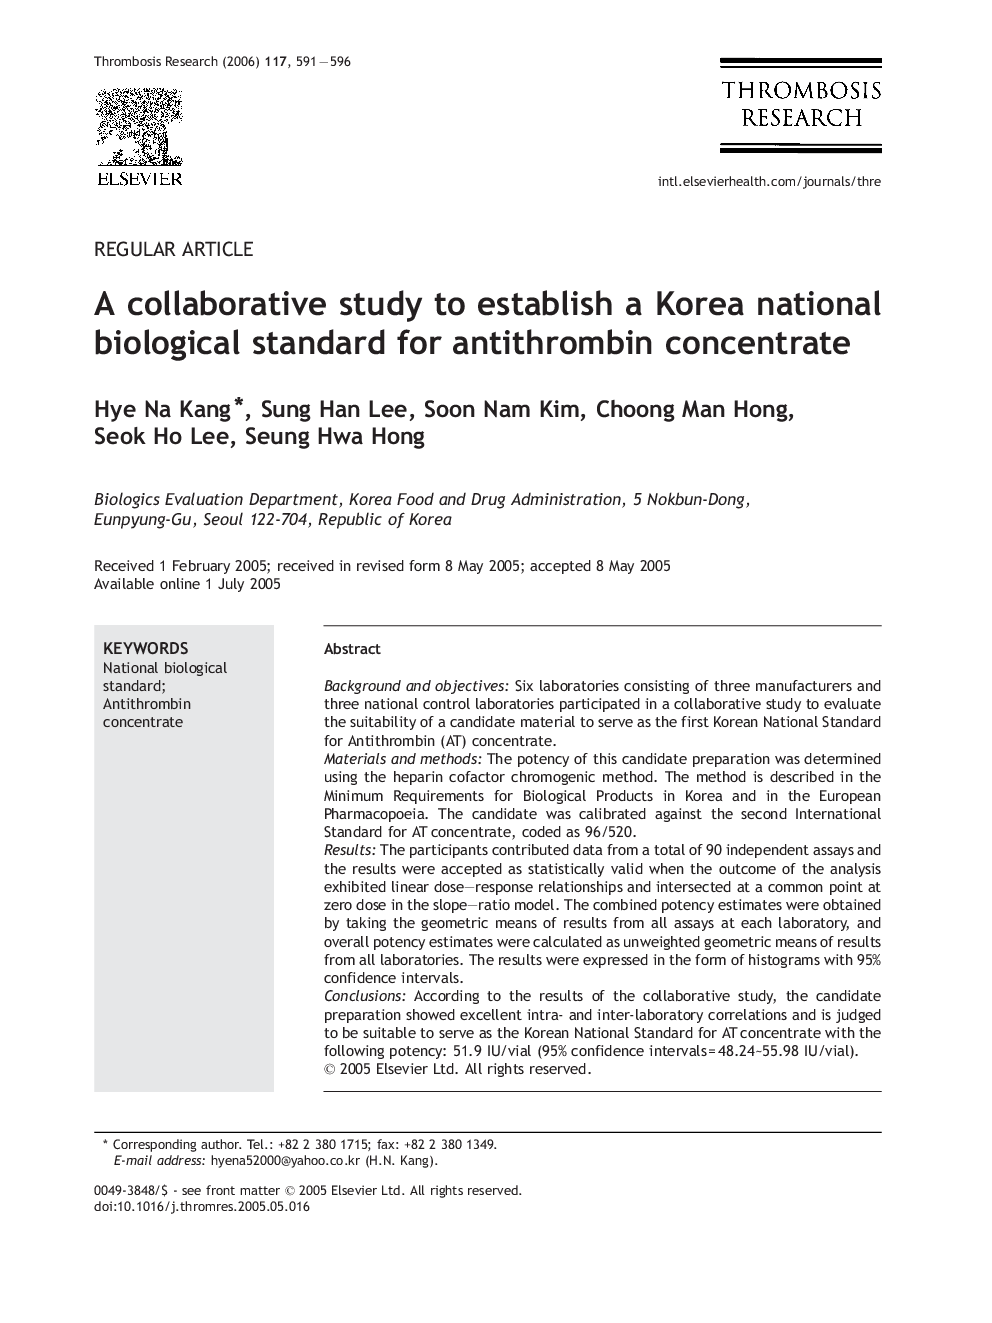 A collaborative study to establish a Korea national biological standard for antithrombin concentrate